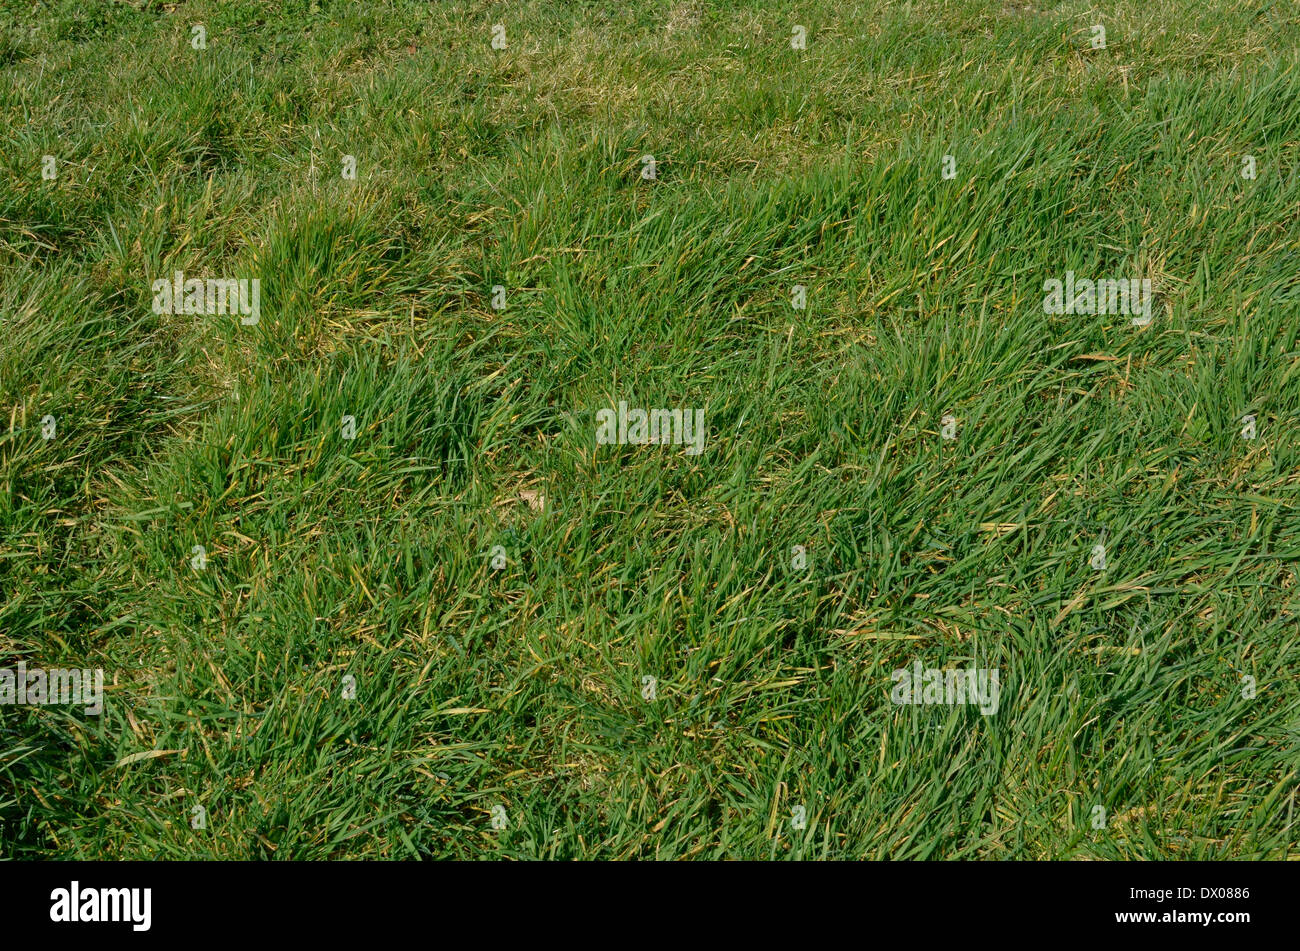 Patch of new verdant grass growth in spring months. Stock Photo